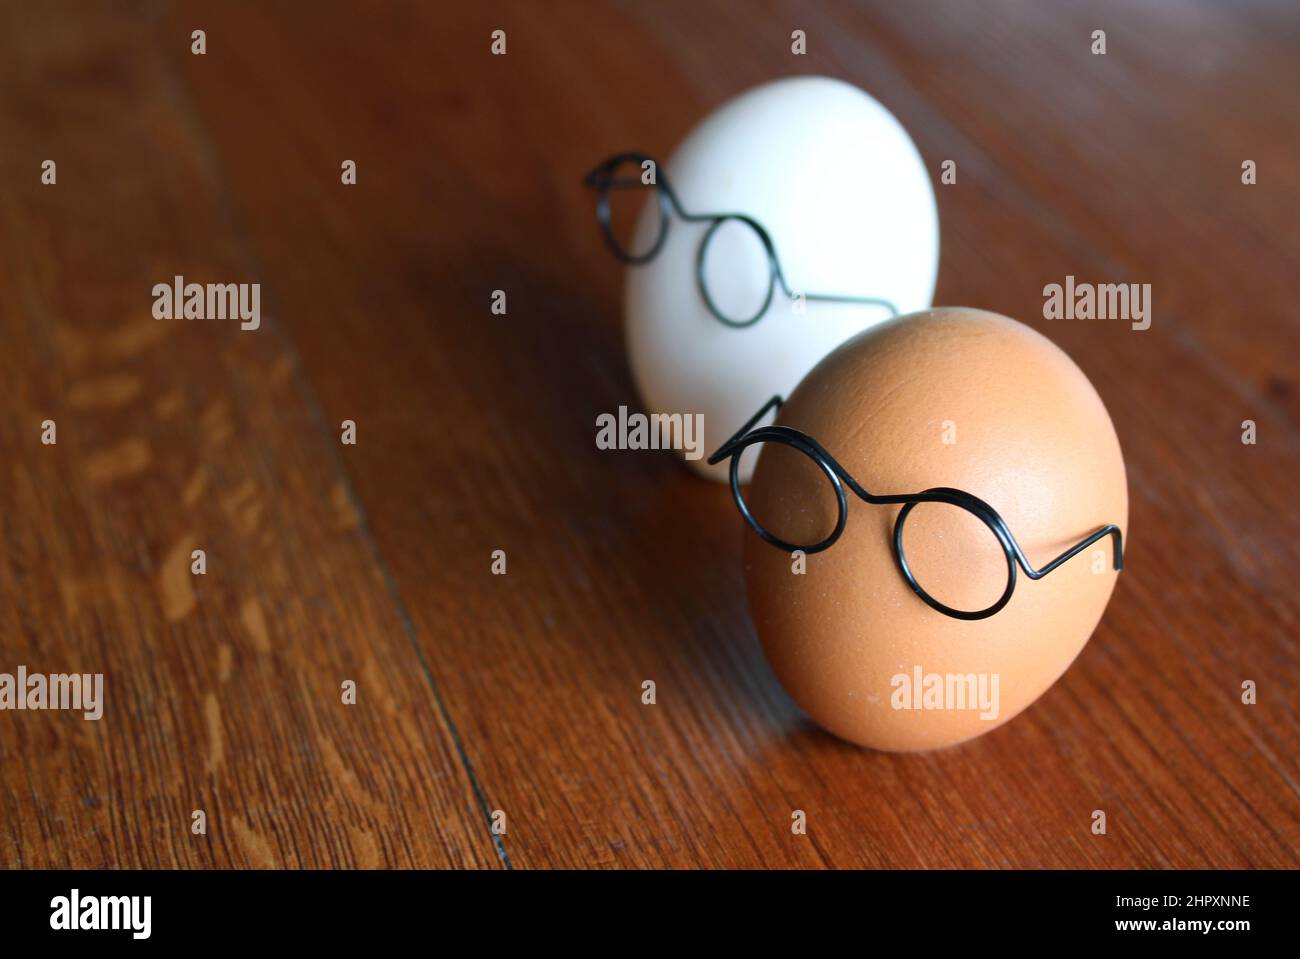 Similar but different concept. White egg and brown egg wear glasses on wooden table Stock Photo